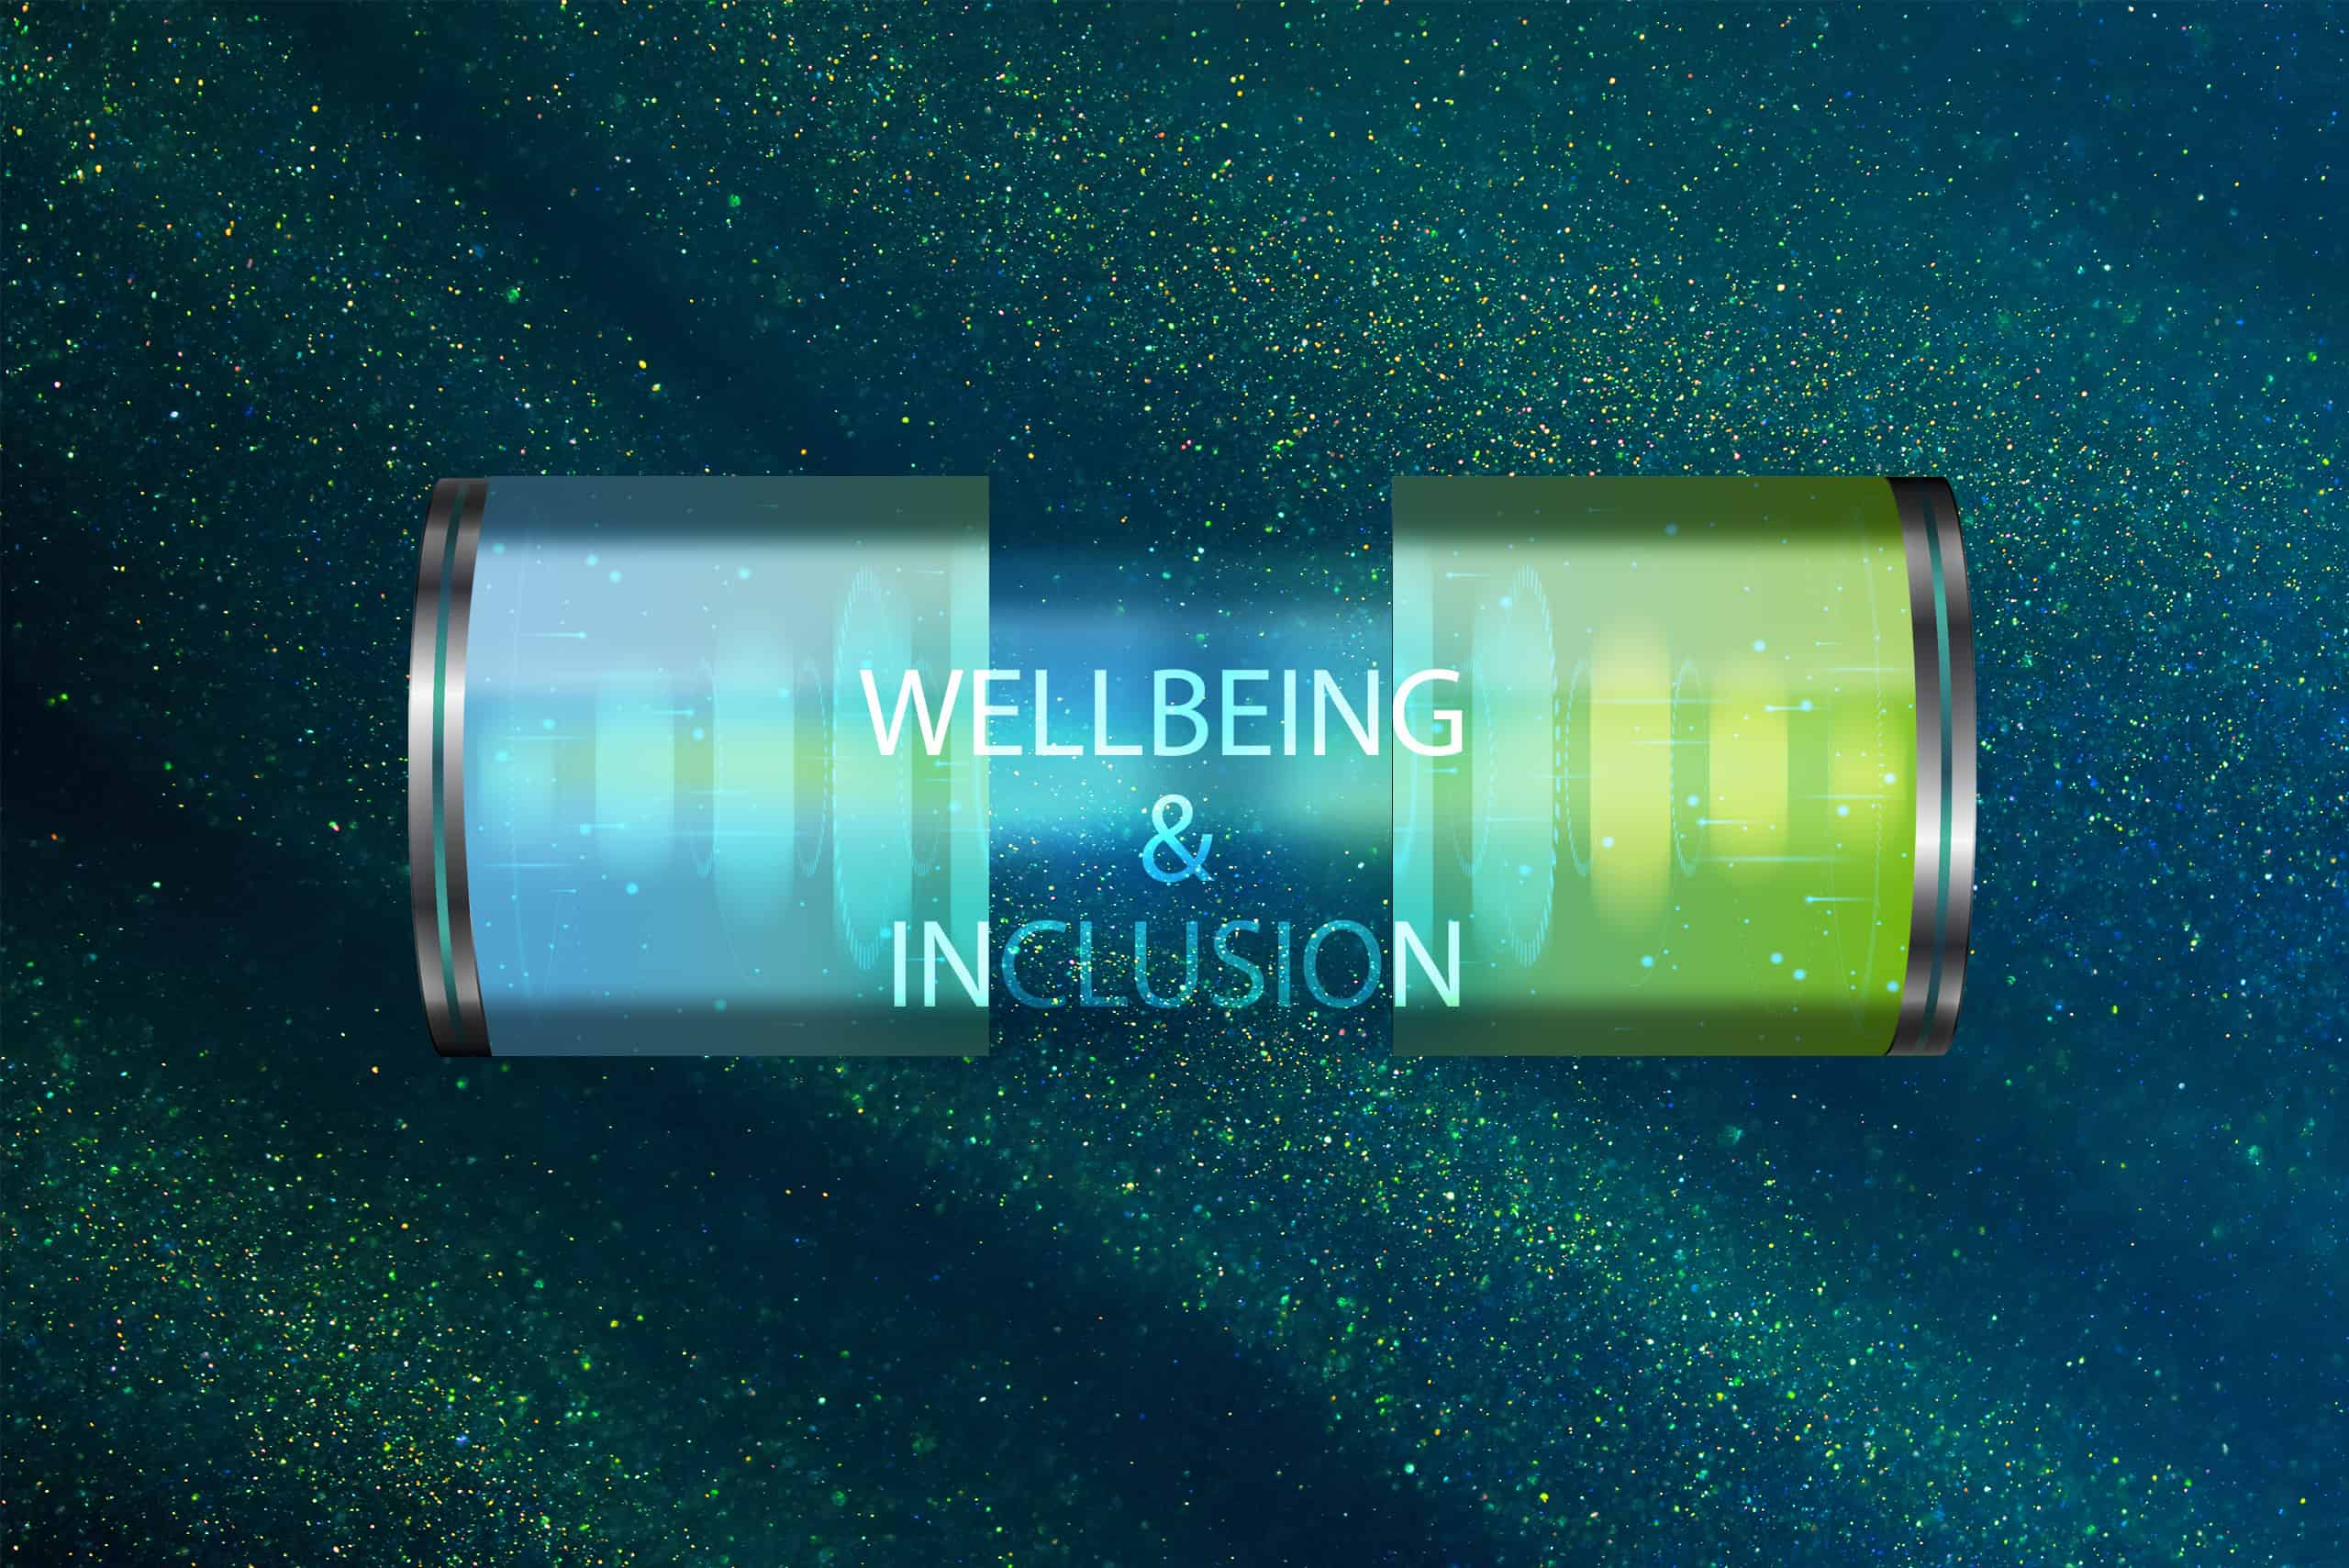 Wellbeing and inclusion capsule image